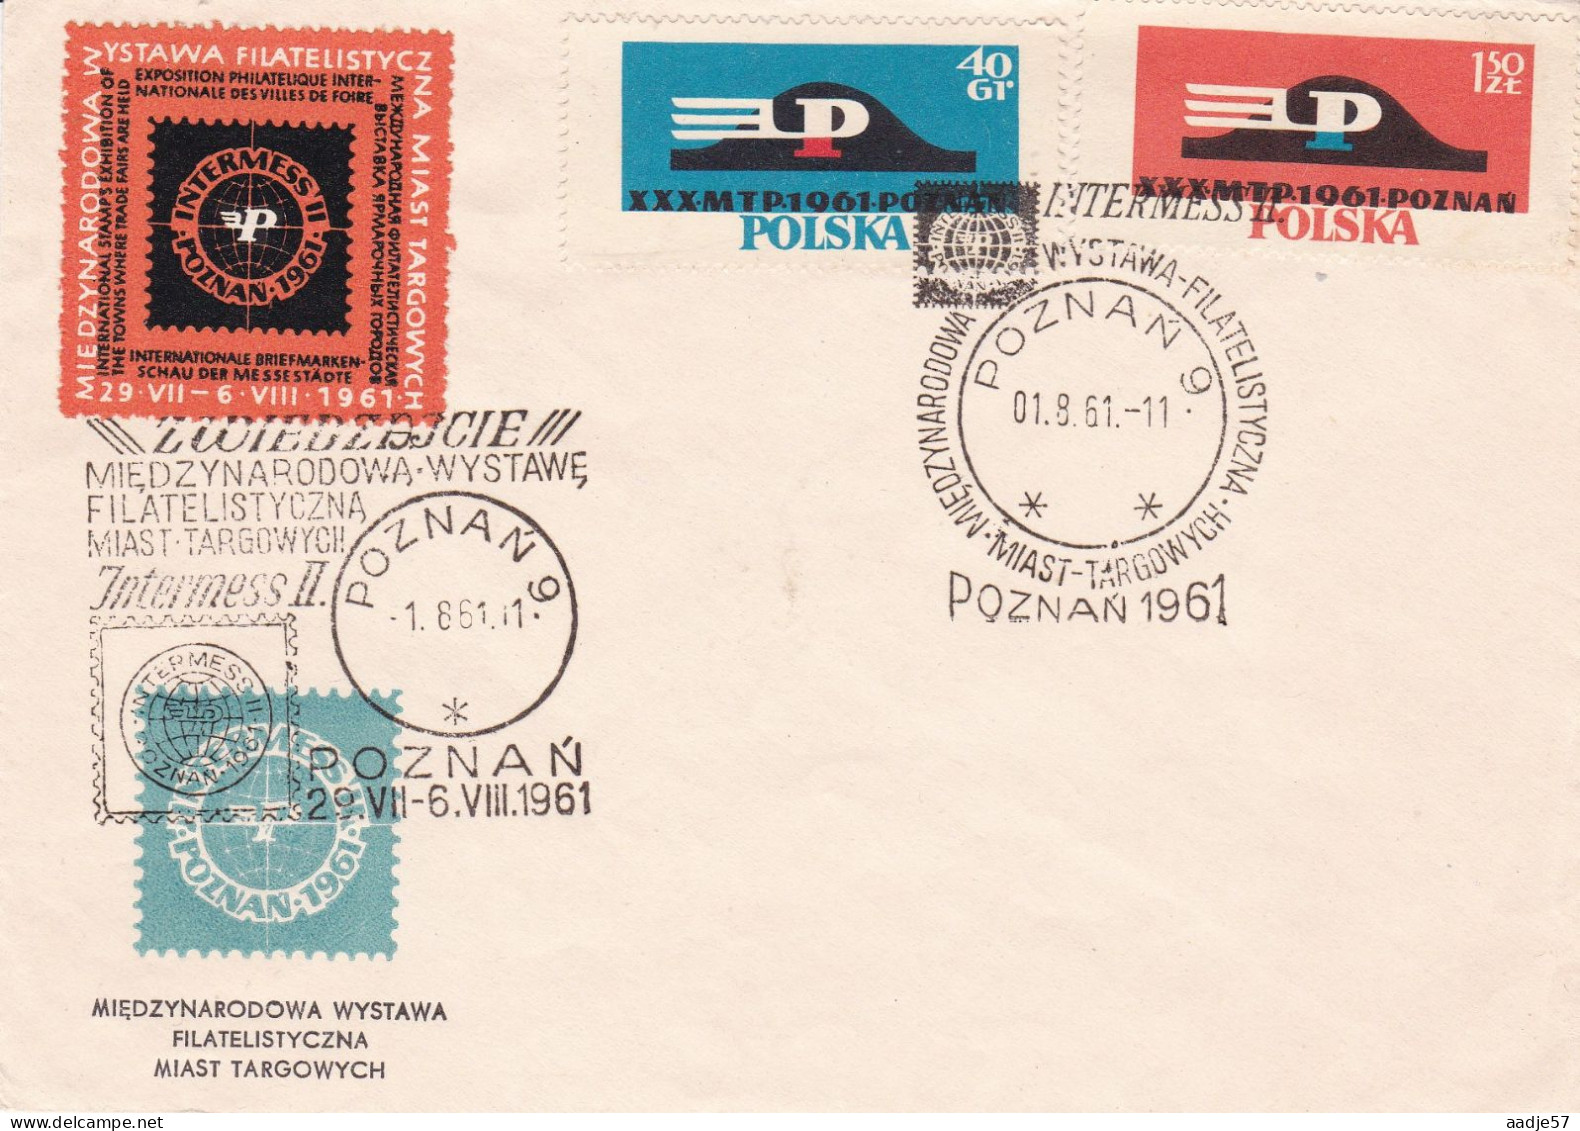 Poland POLAND,1961 INTERMESS II STAMP PHILATELIC EXHIBITION EXPO Special Env. - Covers & Documents